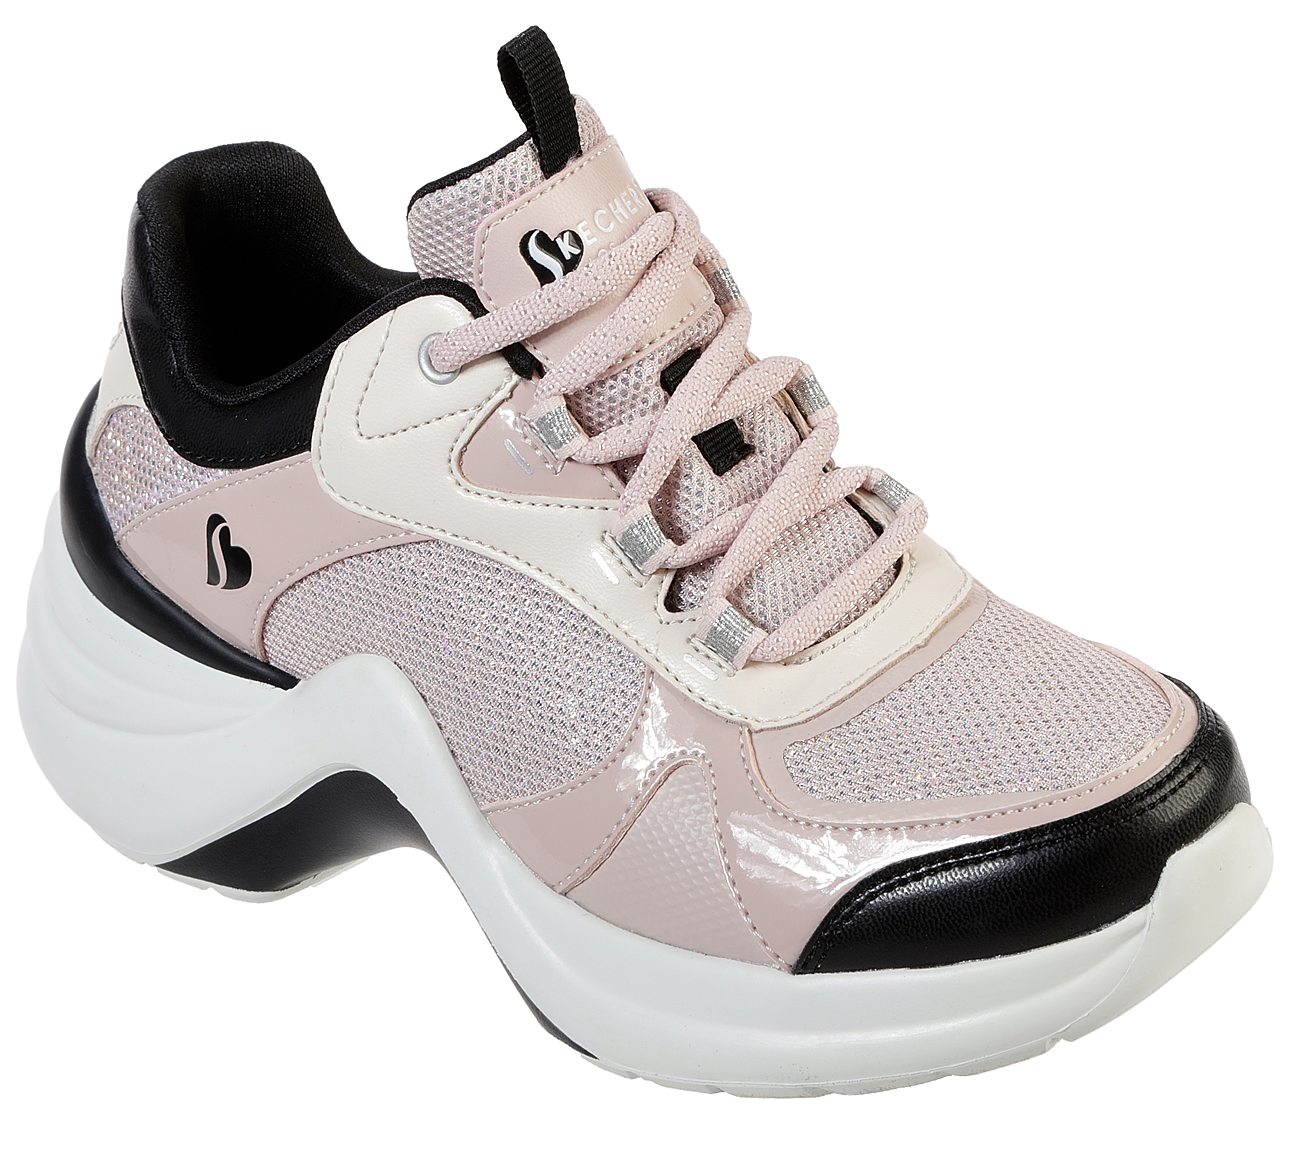 SOLEI ST.-GROOVILICIOUS, PINK/BLACK Footwear Right View